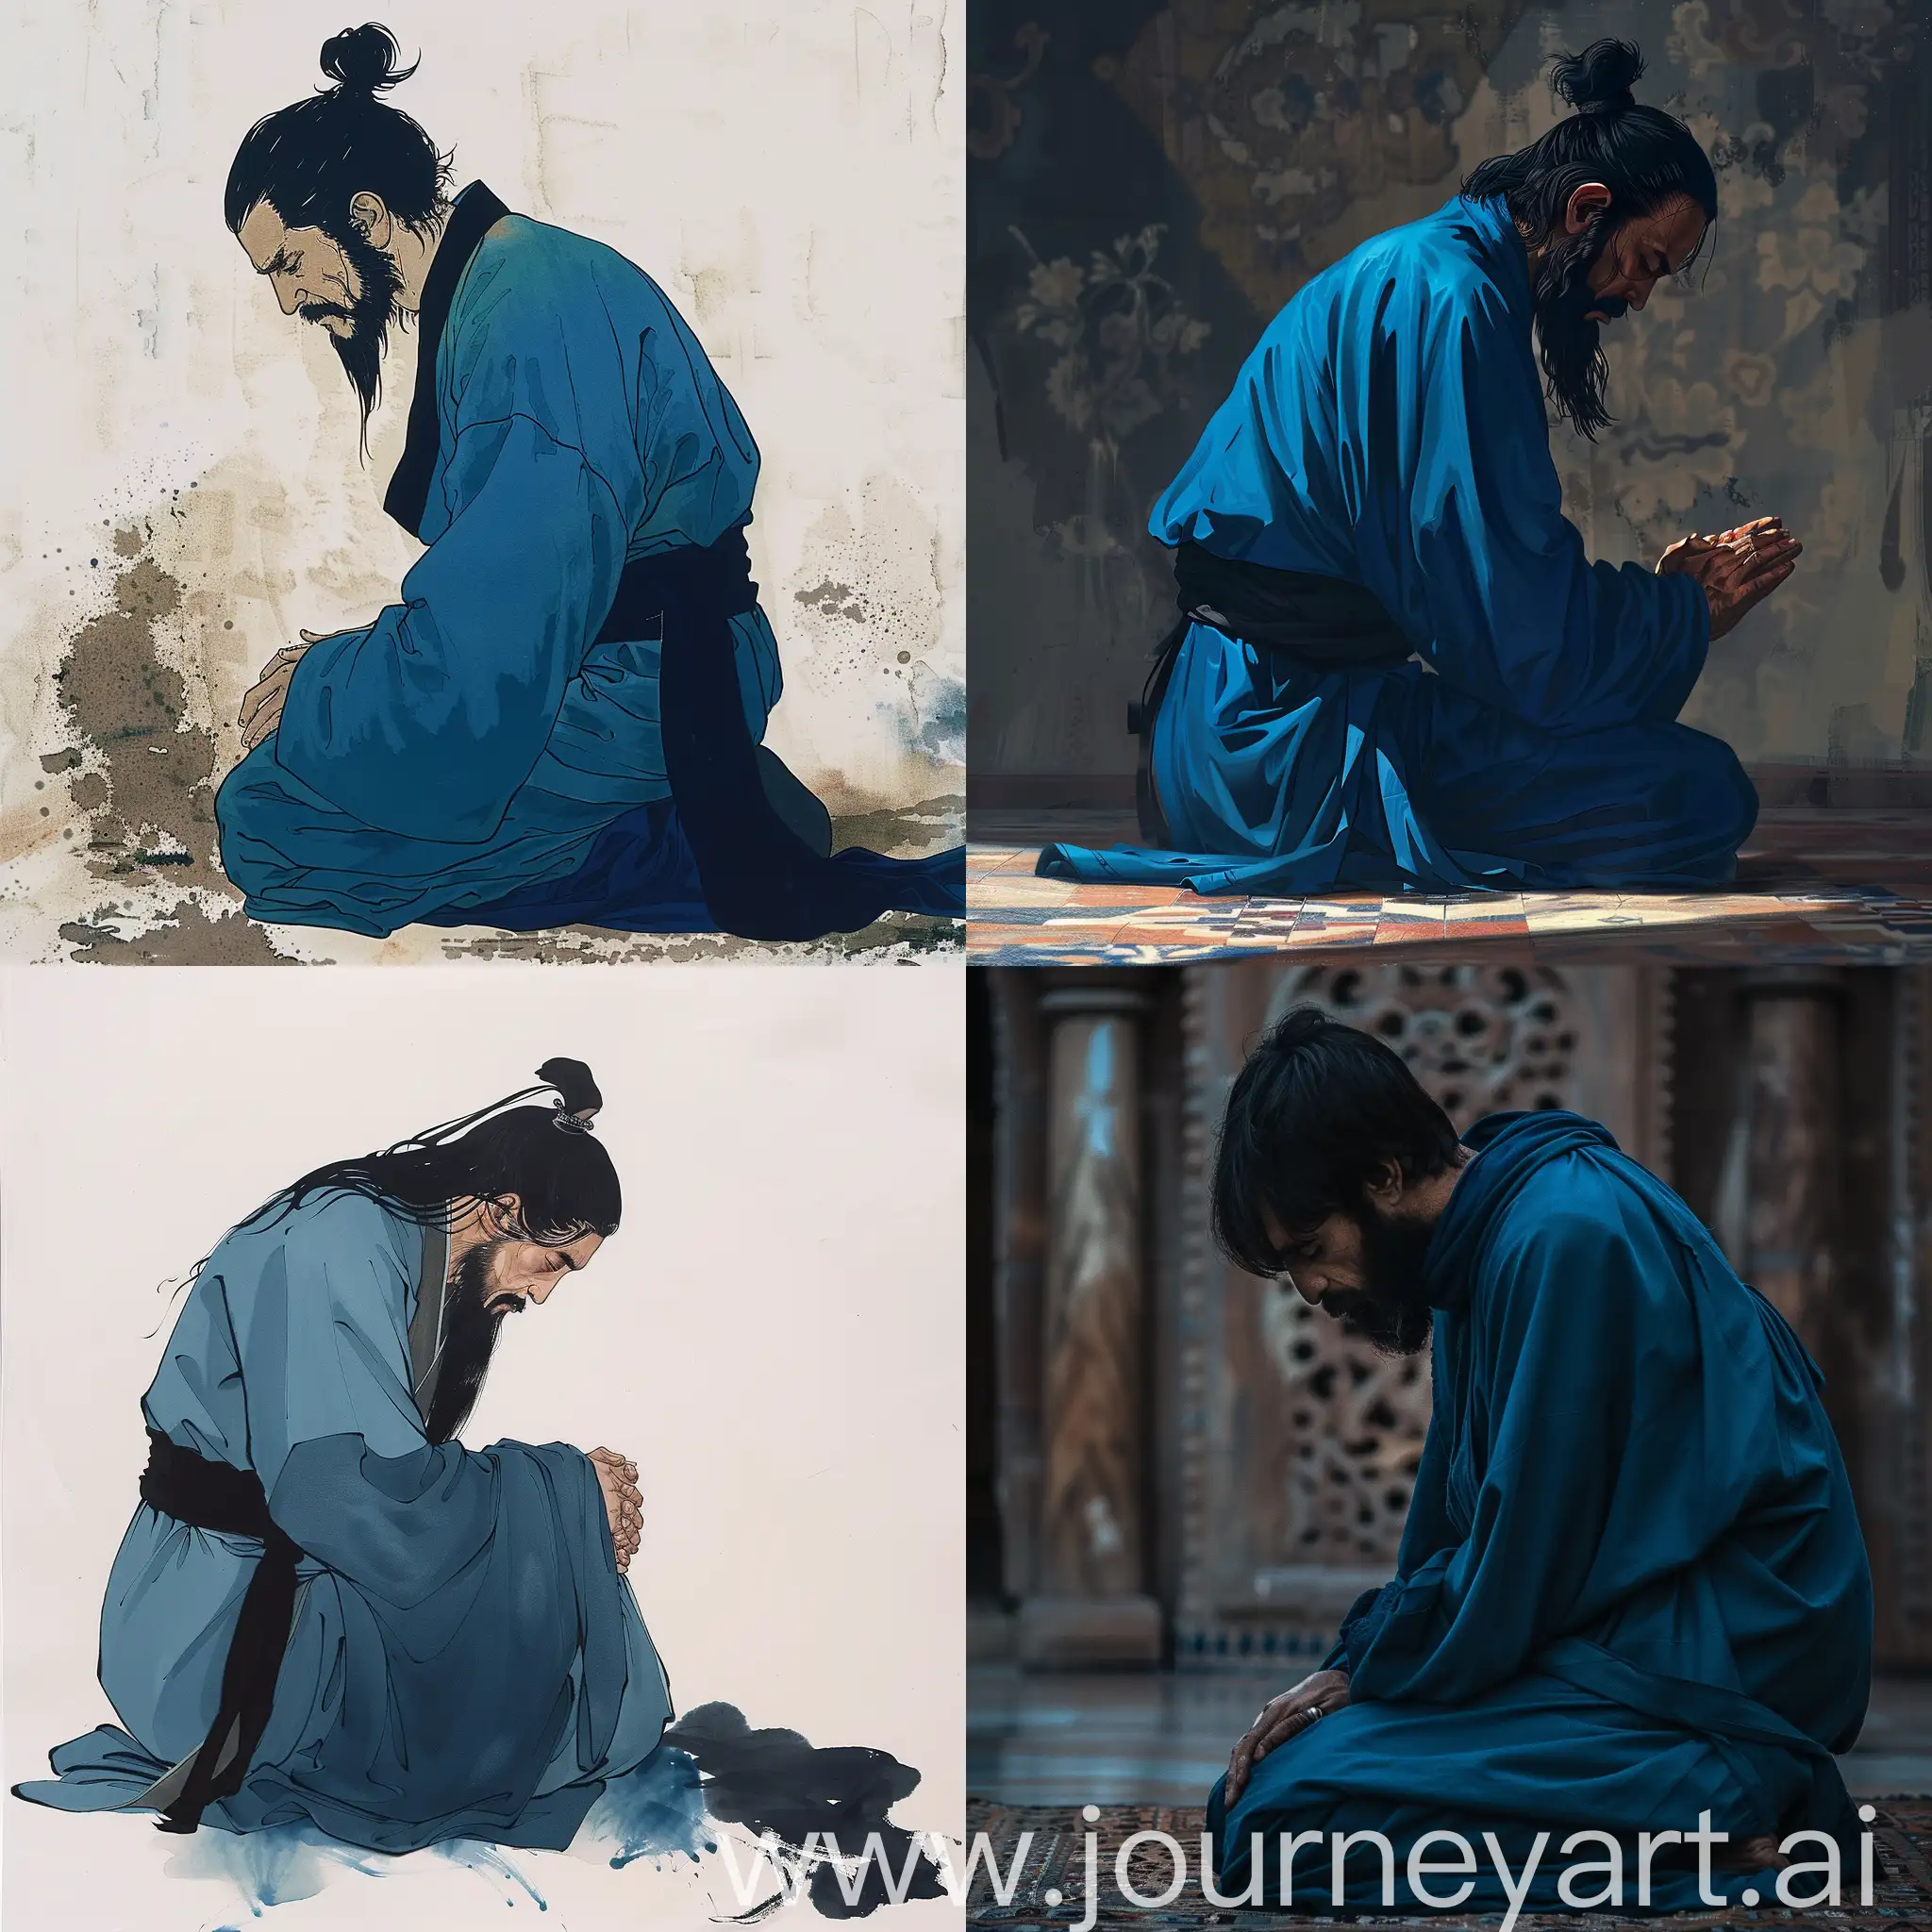 A beautiful image of a monk wearing a blue habit with black hair and black beard kneeling down in prayer 